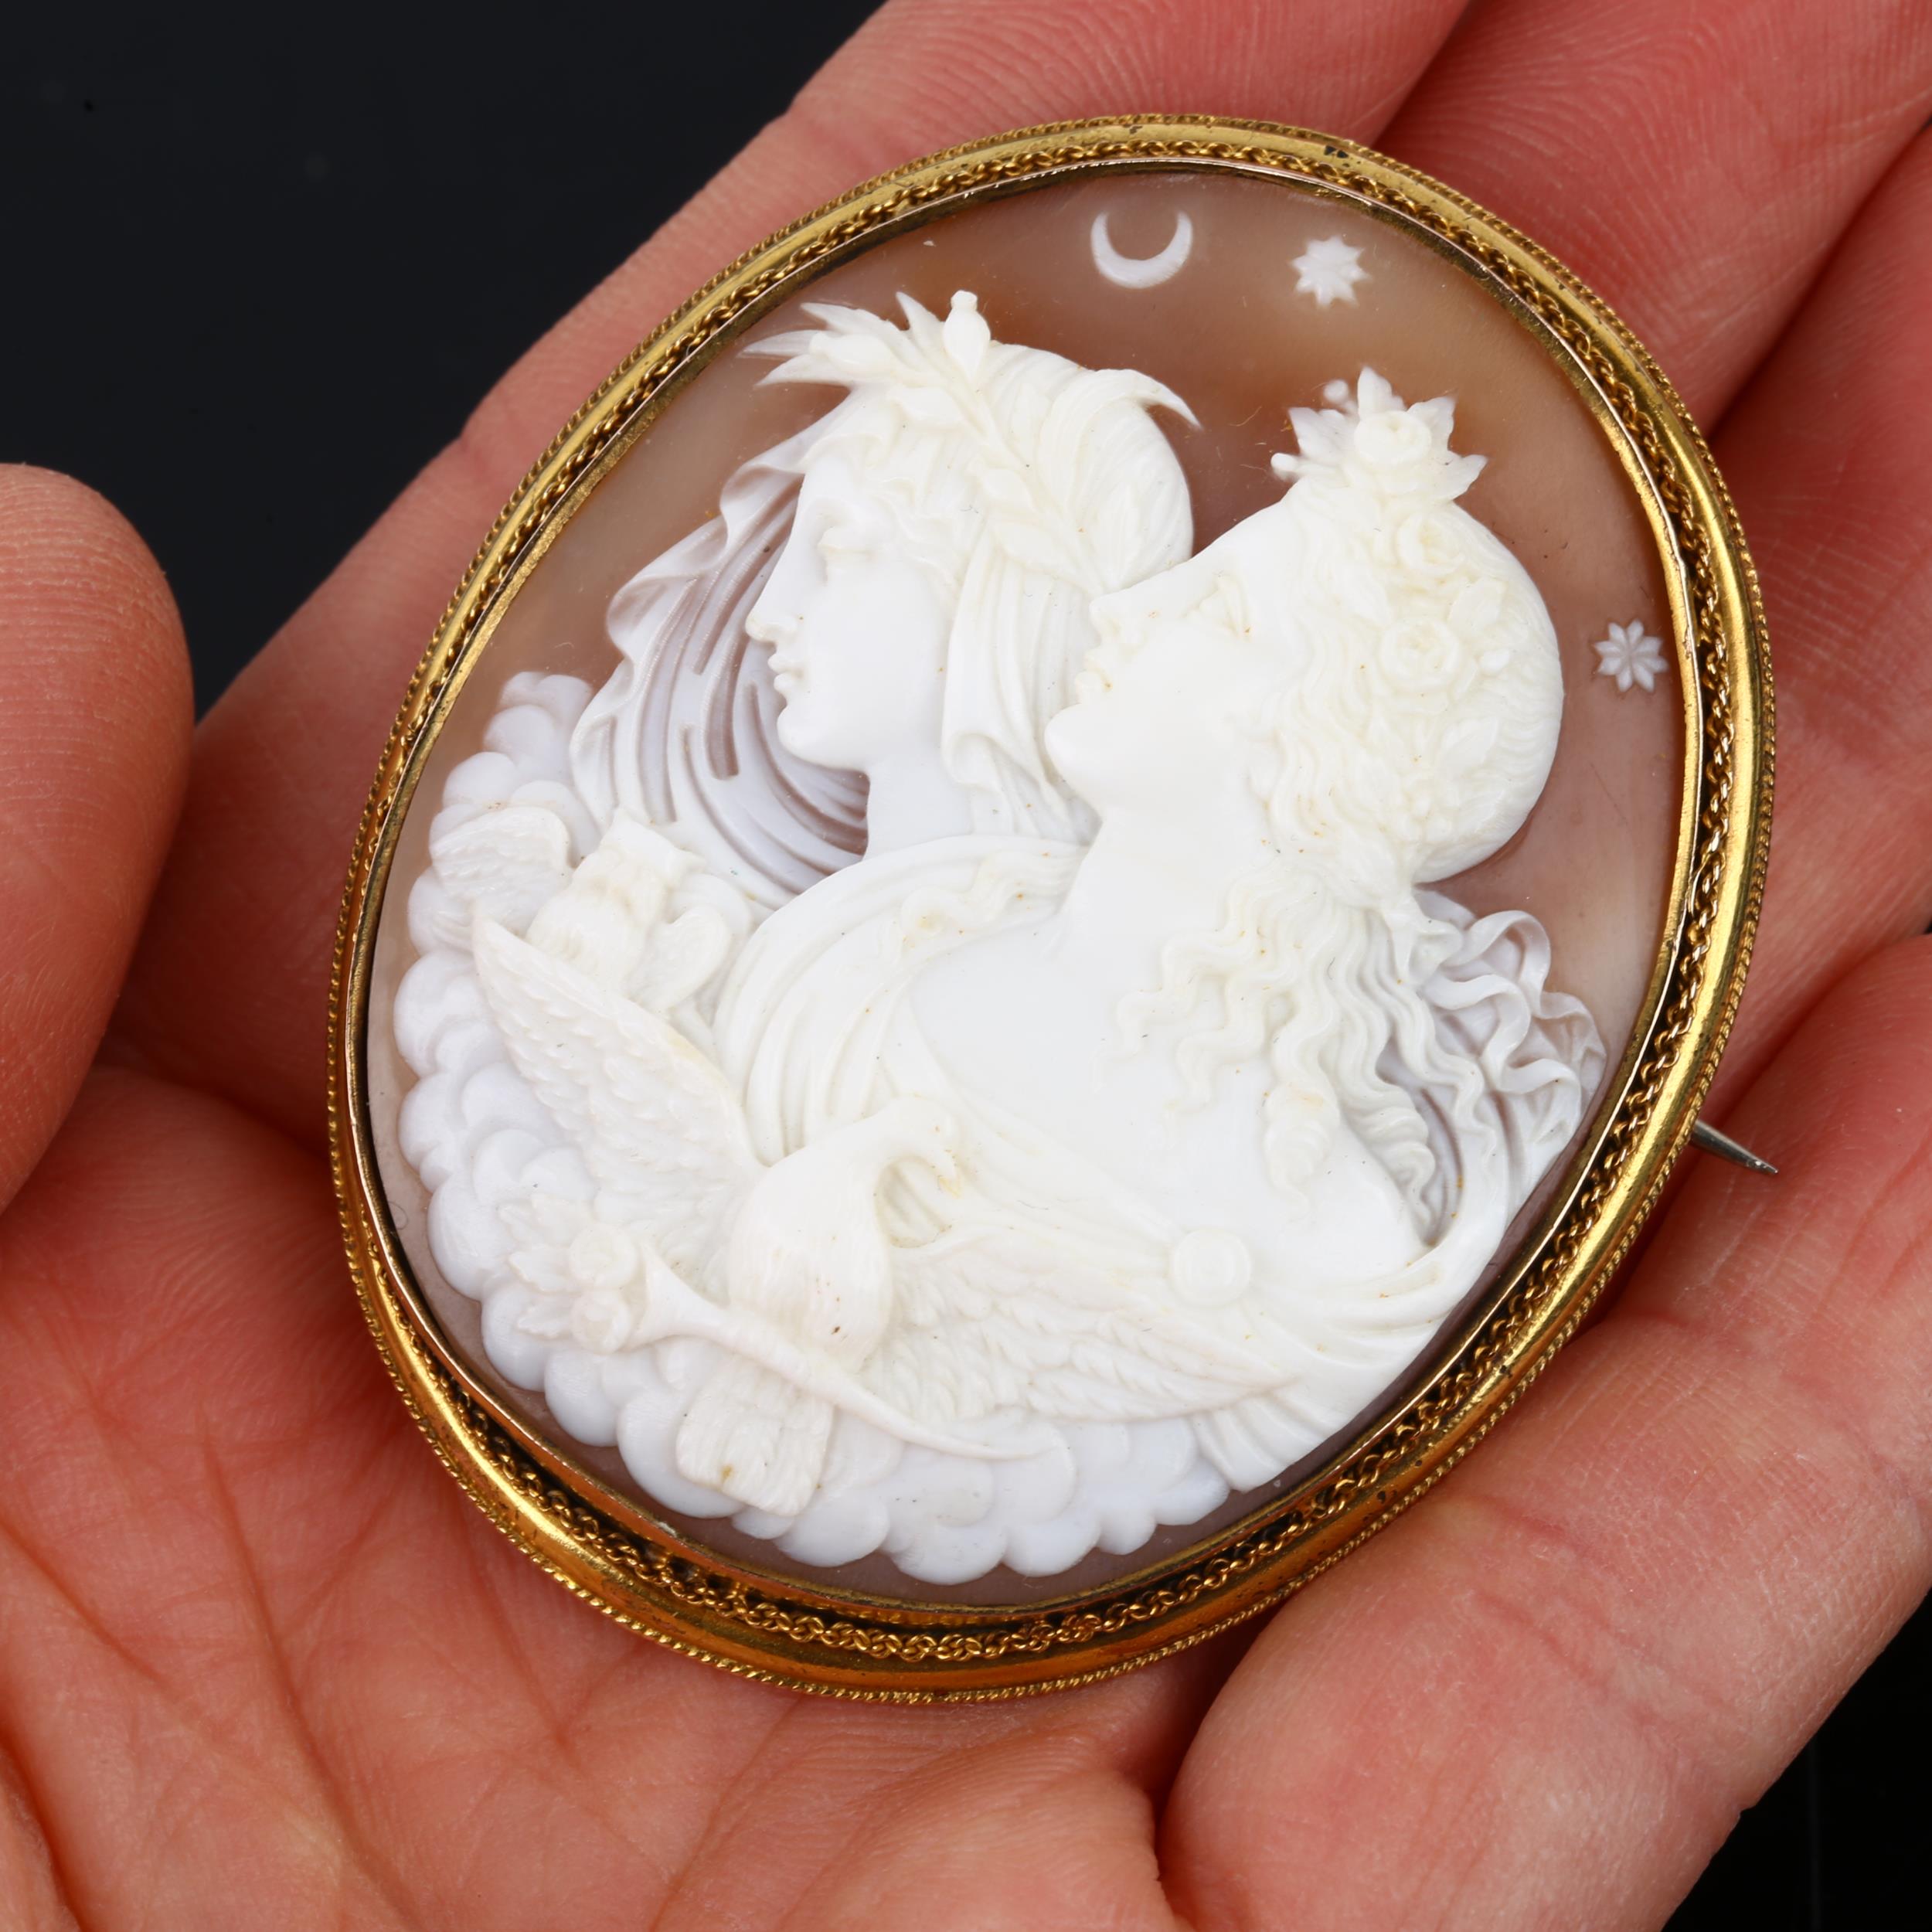 A 19th century shell cameo brooch, relief carved depicting Eos and Nyx (Goddesses of dawn and - Image 4 of 4